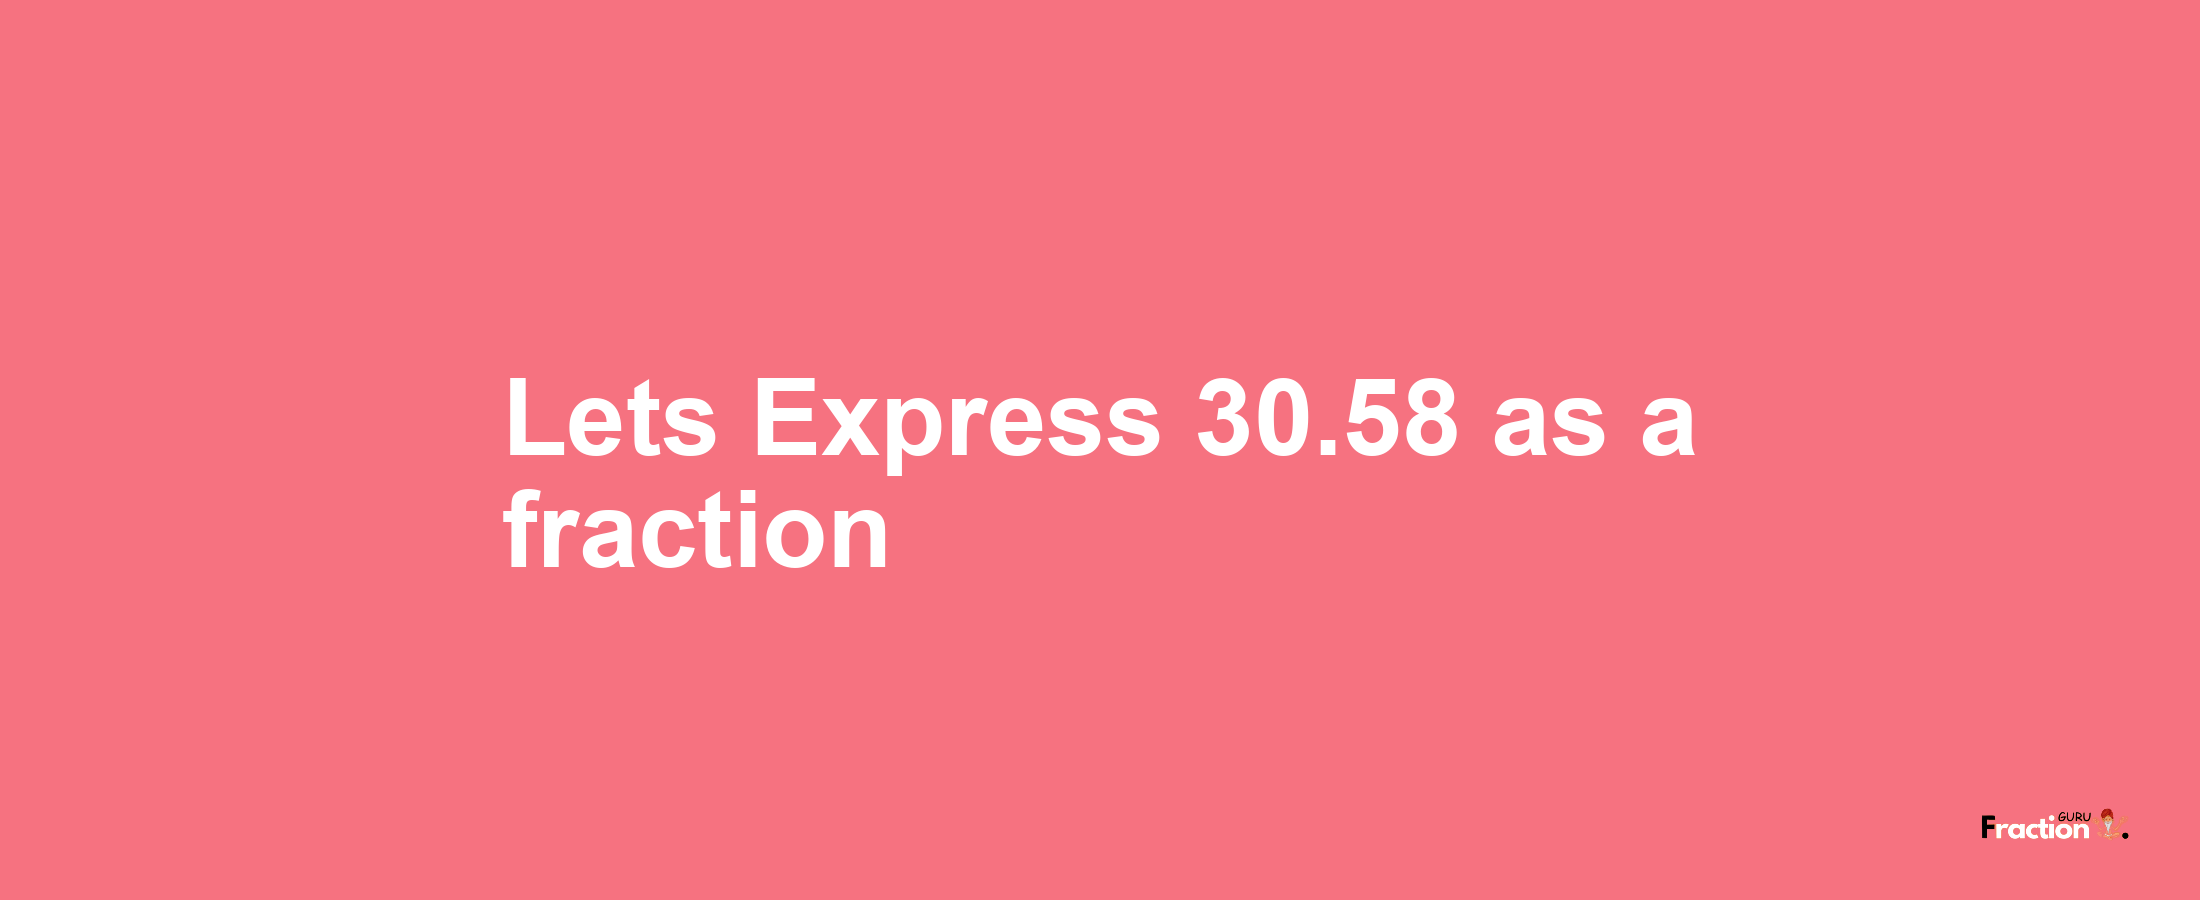 Lets Express 30.58 as afraction